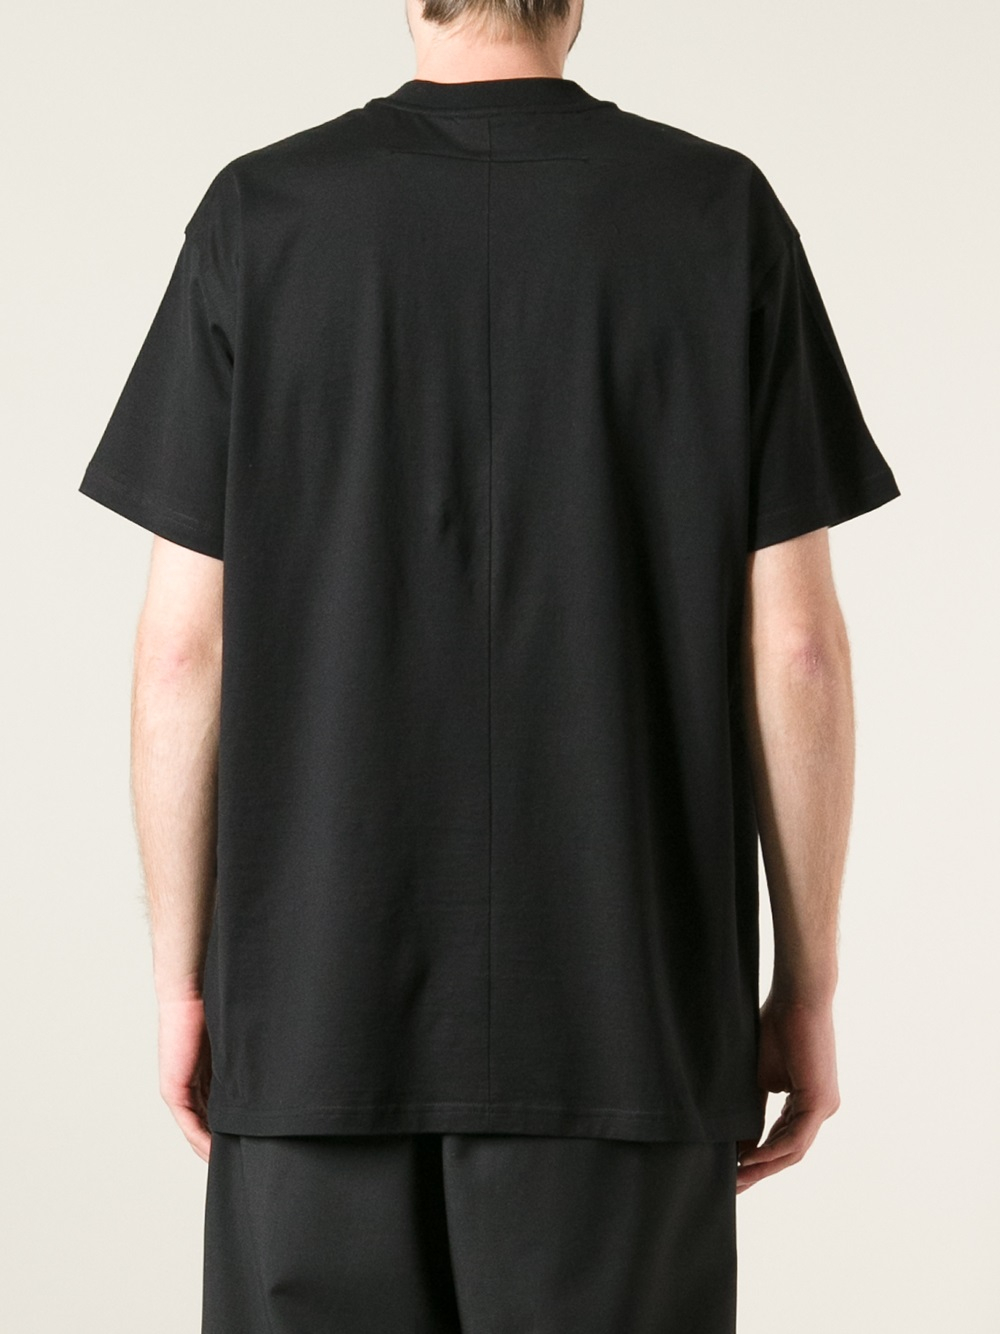 Givenchy Bambi Printed Tshirt in Black for Men - Lyst